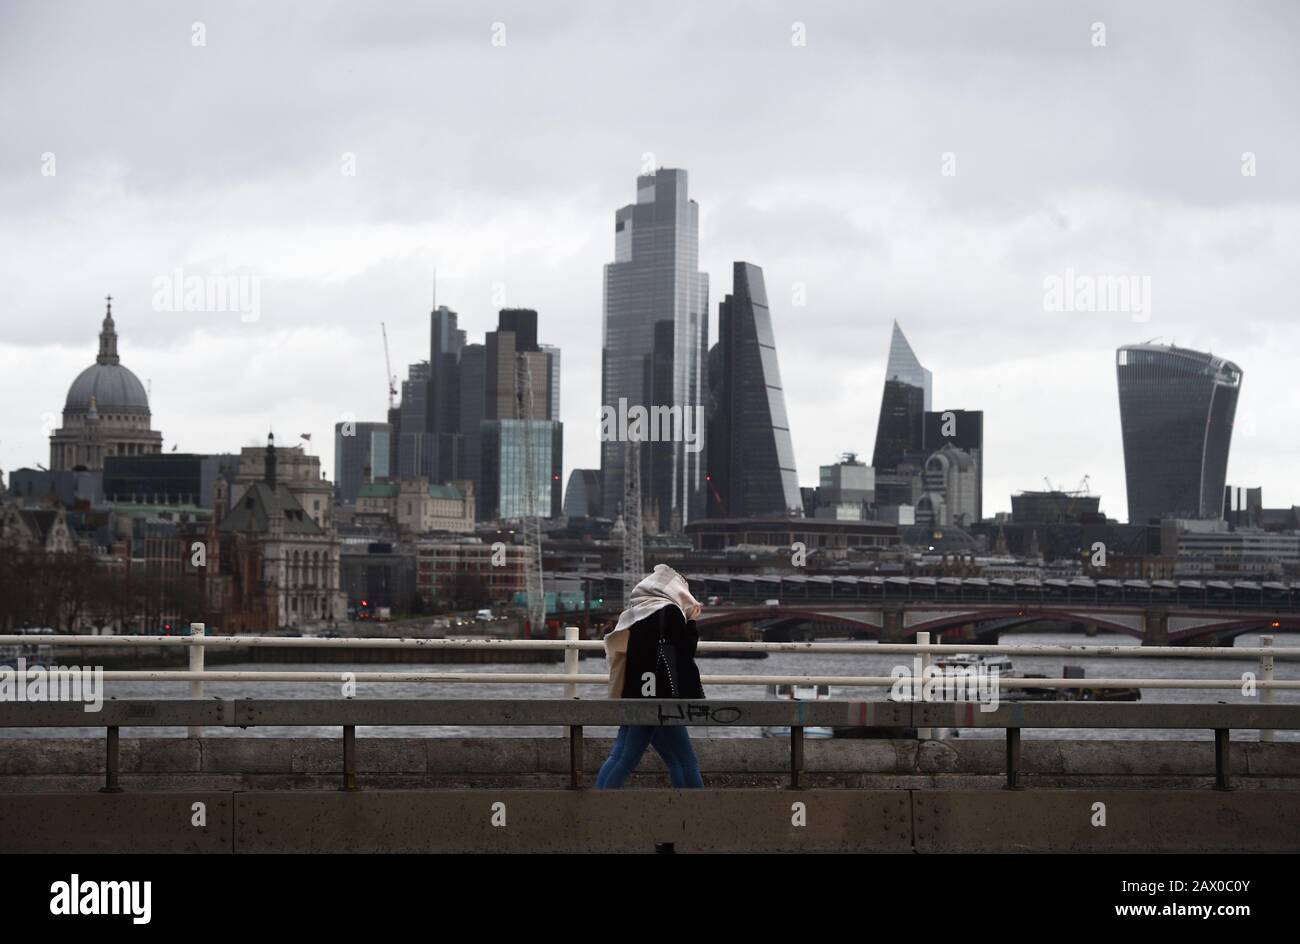 People walk through strong winds across Waterloo Bridge in London, the Met Office have said that 'a spell of very strong winds,' with gusts of 60-70mph, is expected across southern England on Monday, bringing likely delays to road, rail, air and ferry transport. Stock Photo